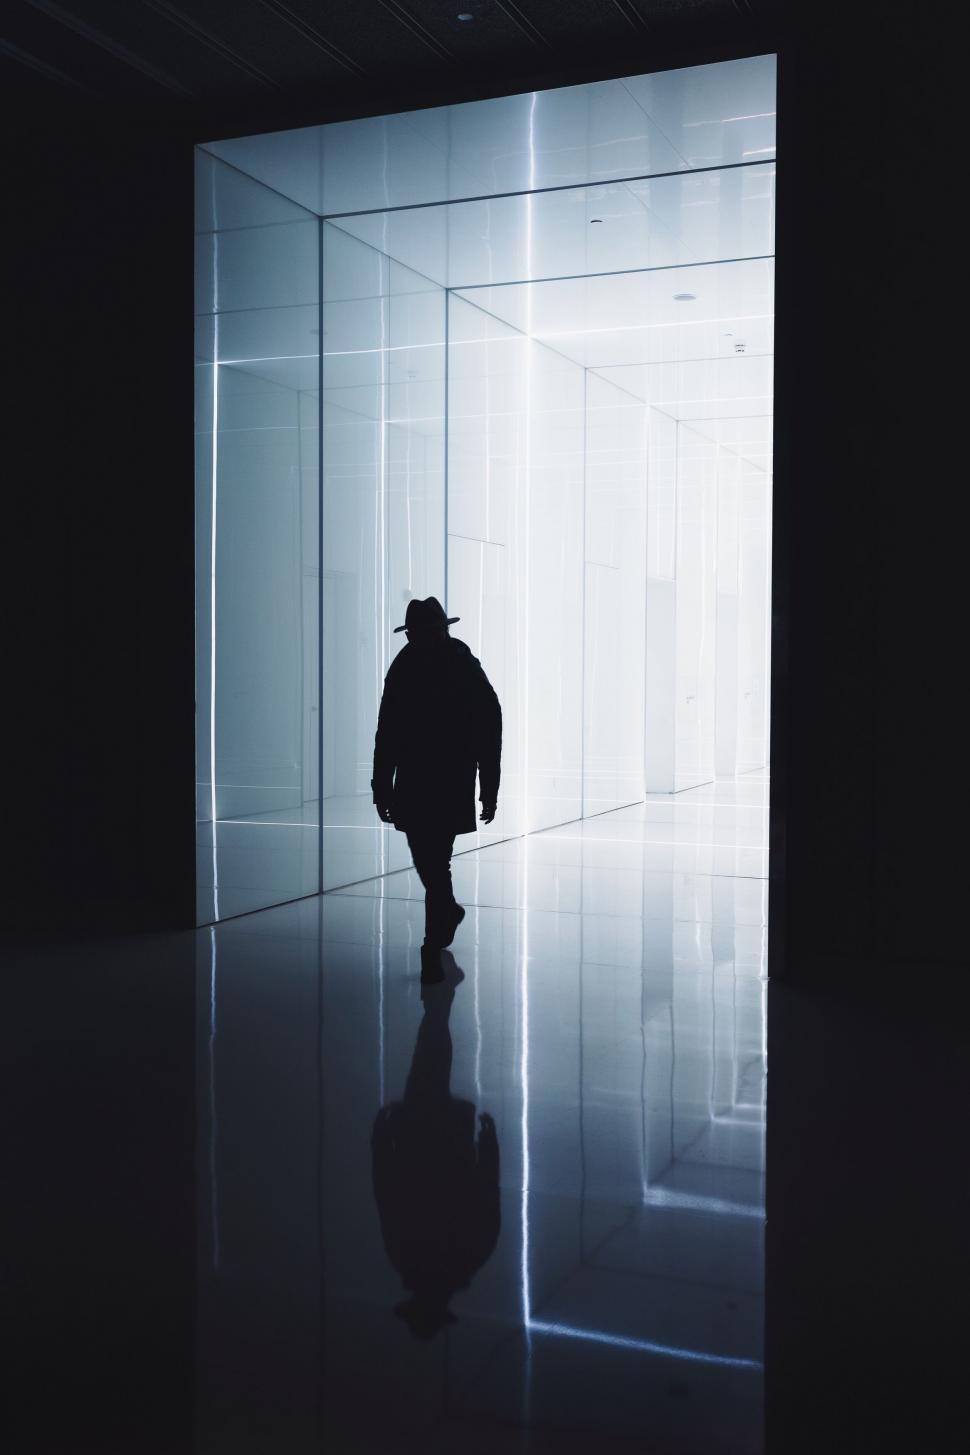 Free Image of A person walking in a hallway 